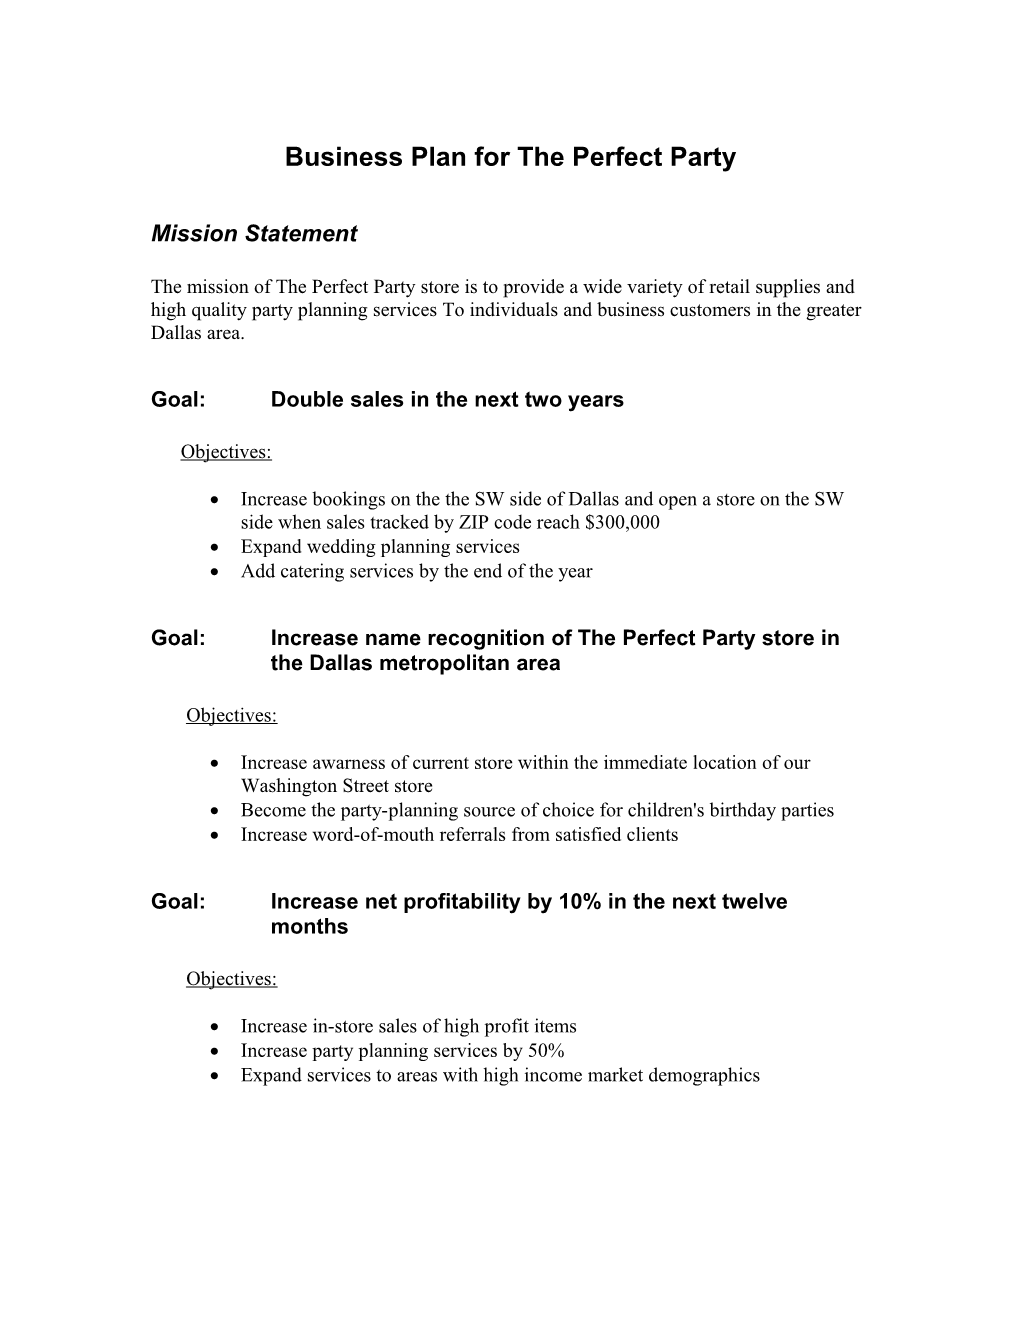 Business Plan for the Perfect Party